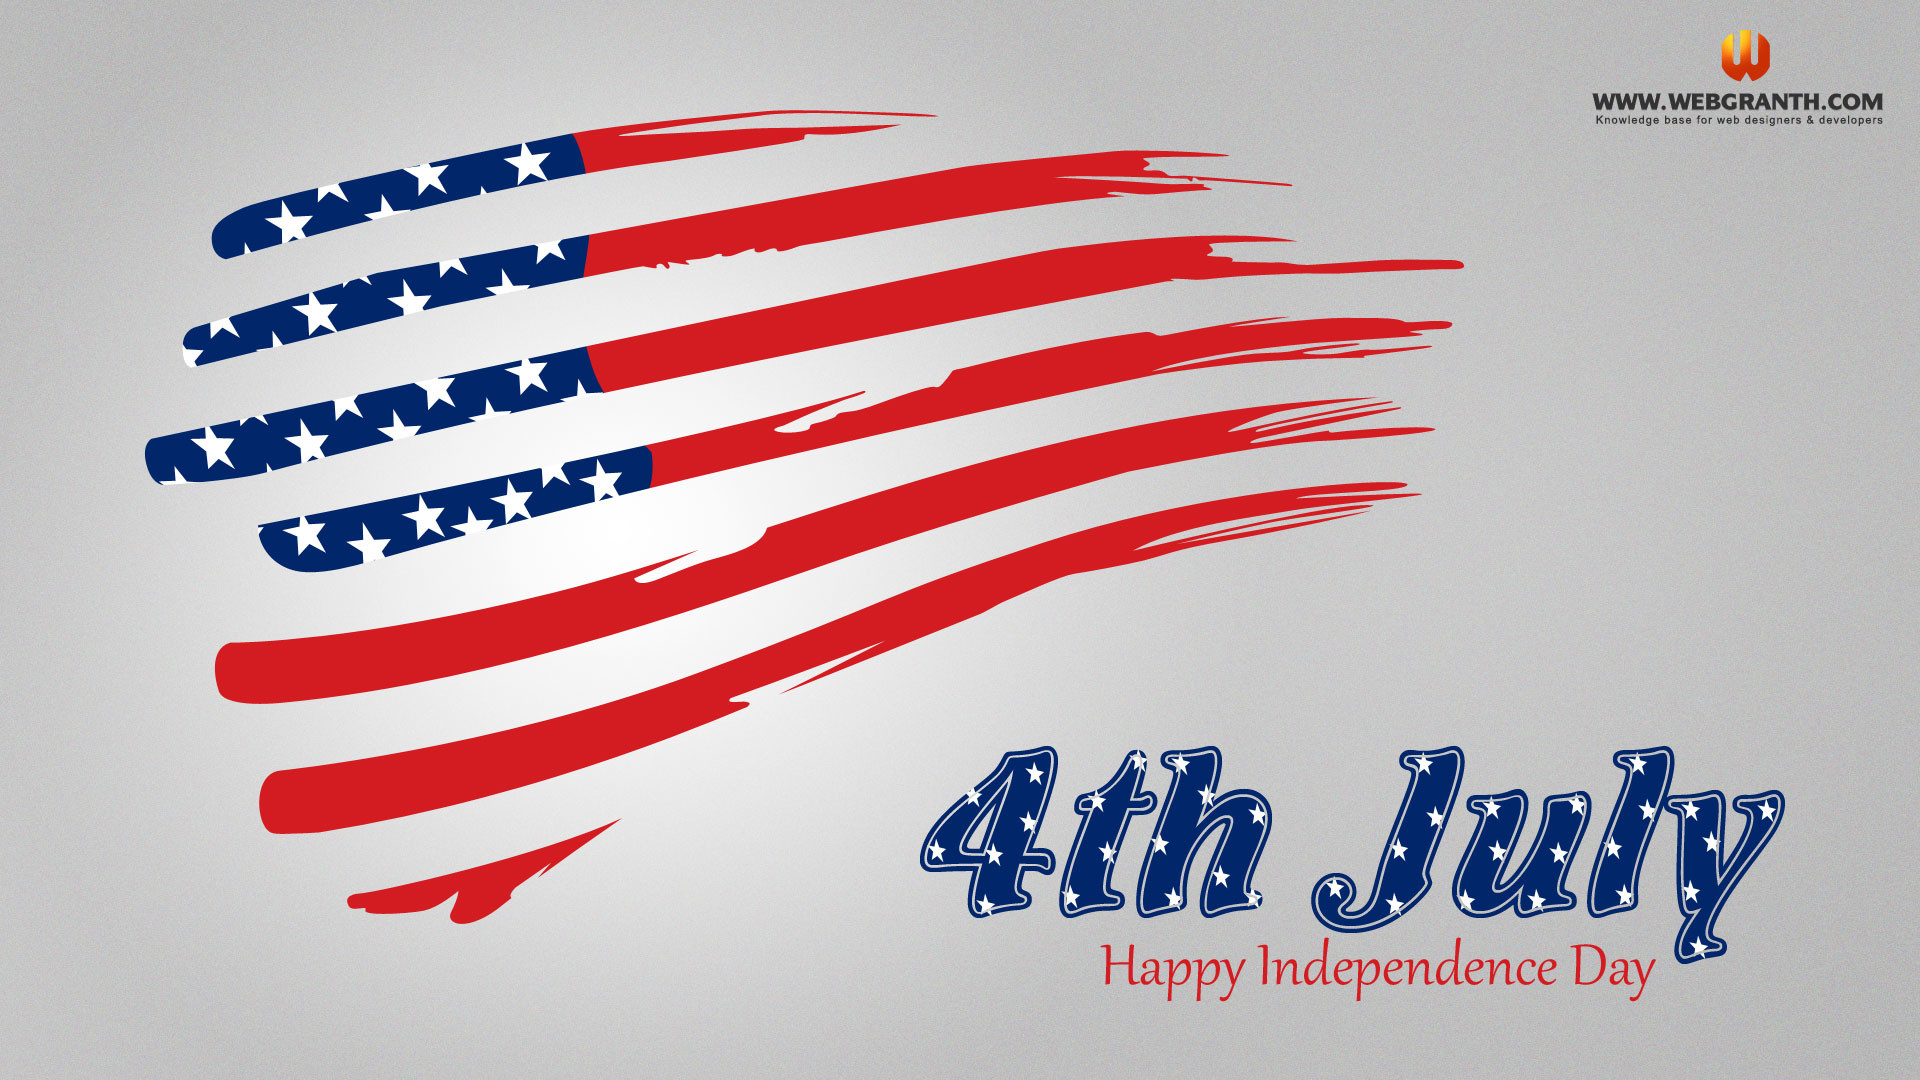 America us independence day 4th july hd wallpaper